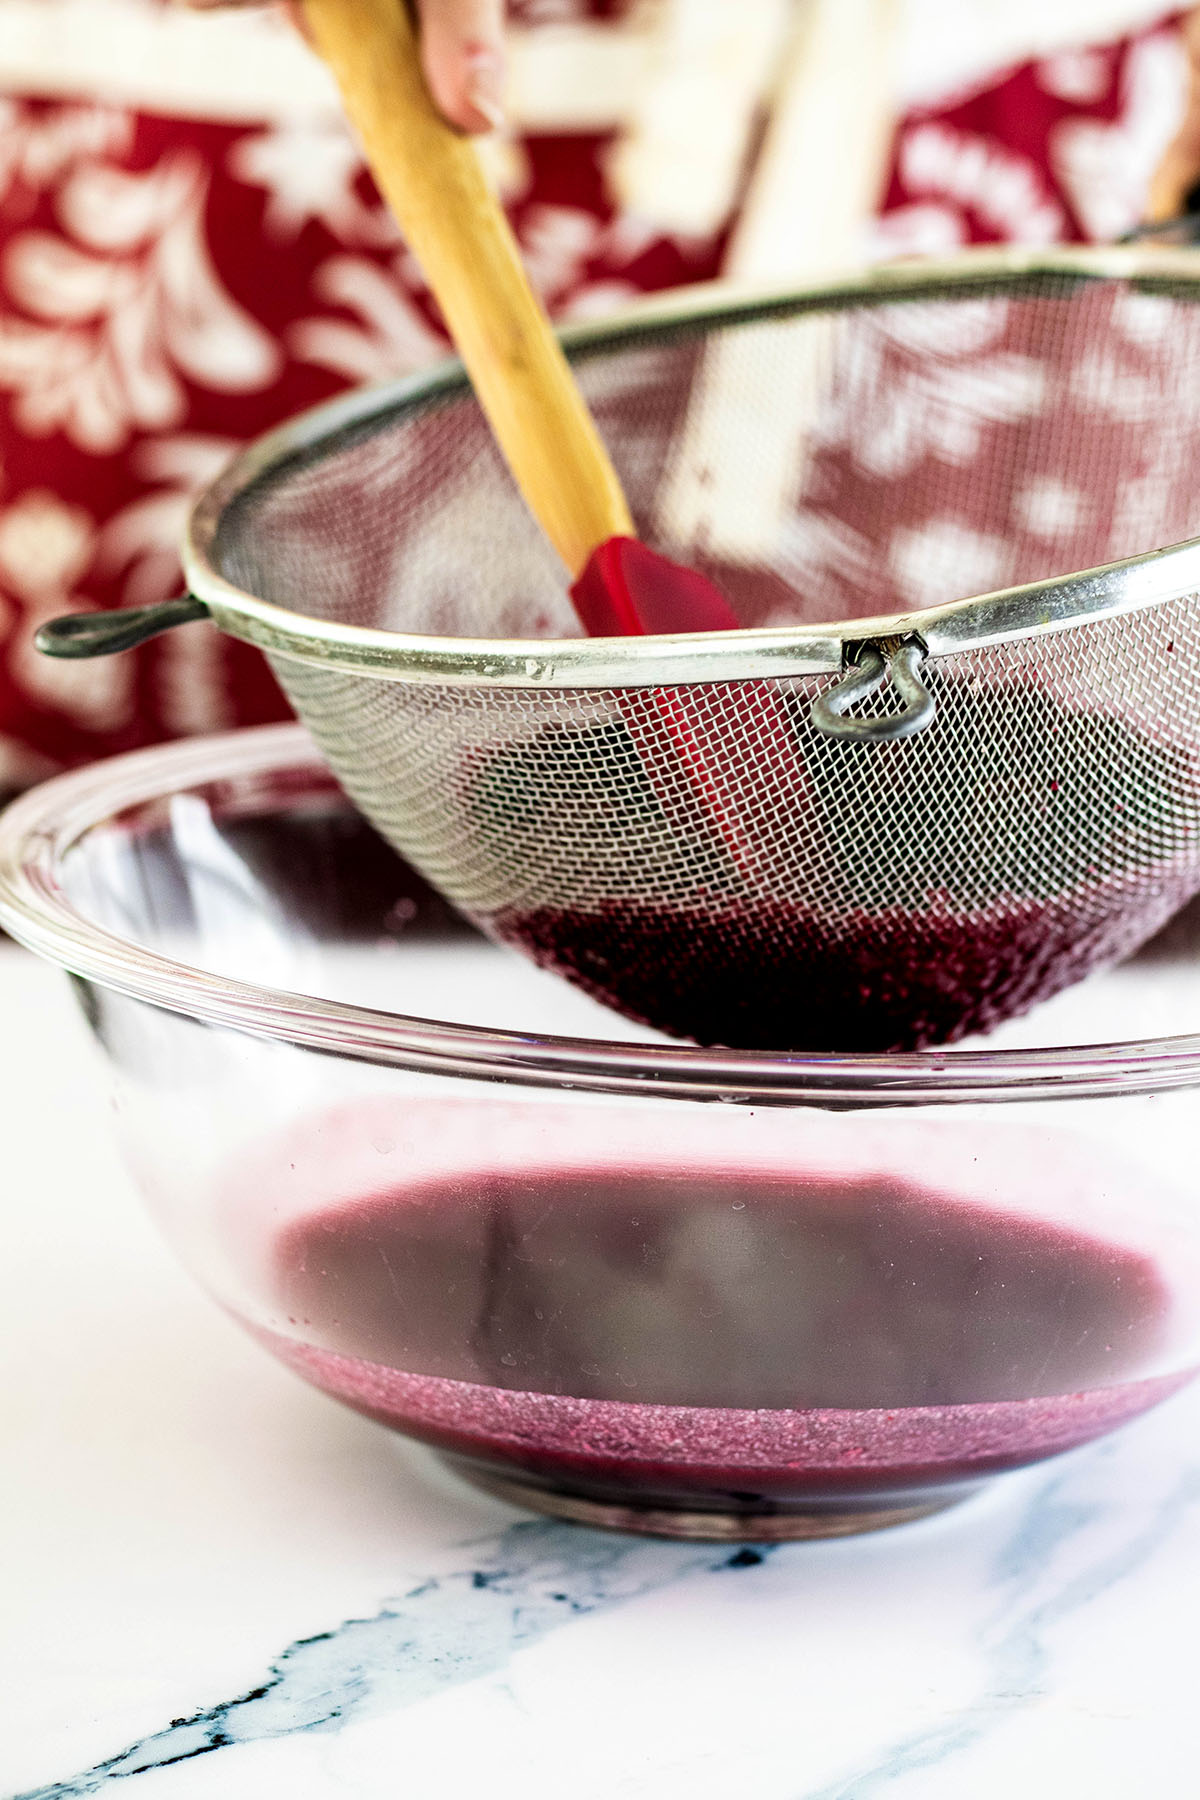 Cooked raspberry syrup being strained through a sieve